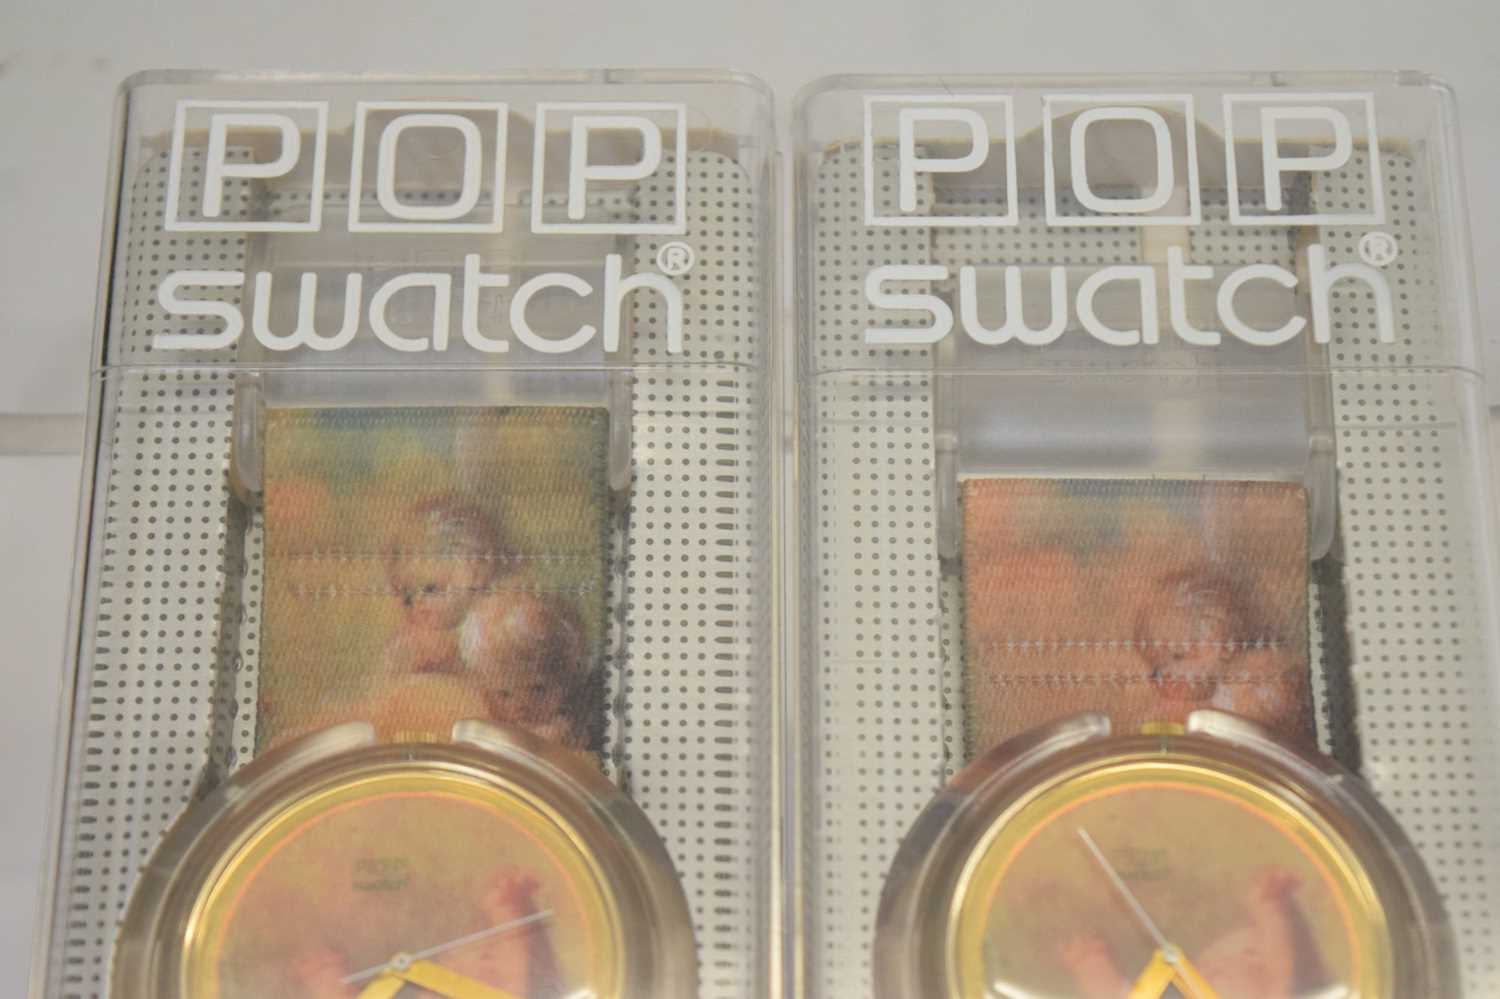 Vivienne Westwood Pop Swatch - Two 'Putti' PWK-168 Swatch watches - Image 2 of 4